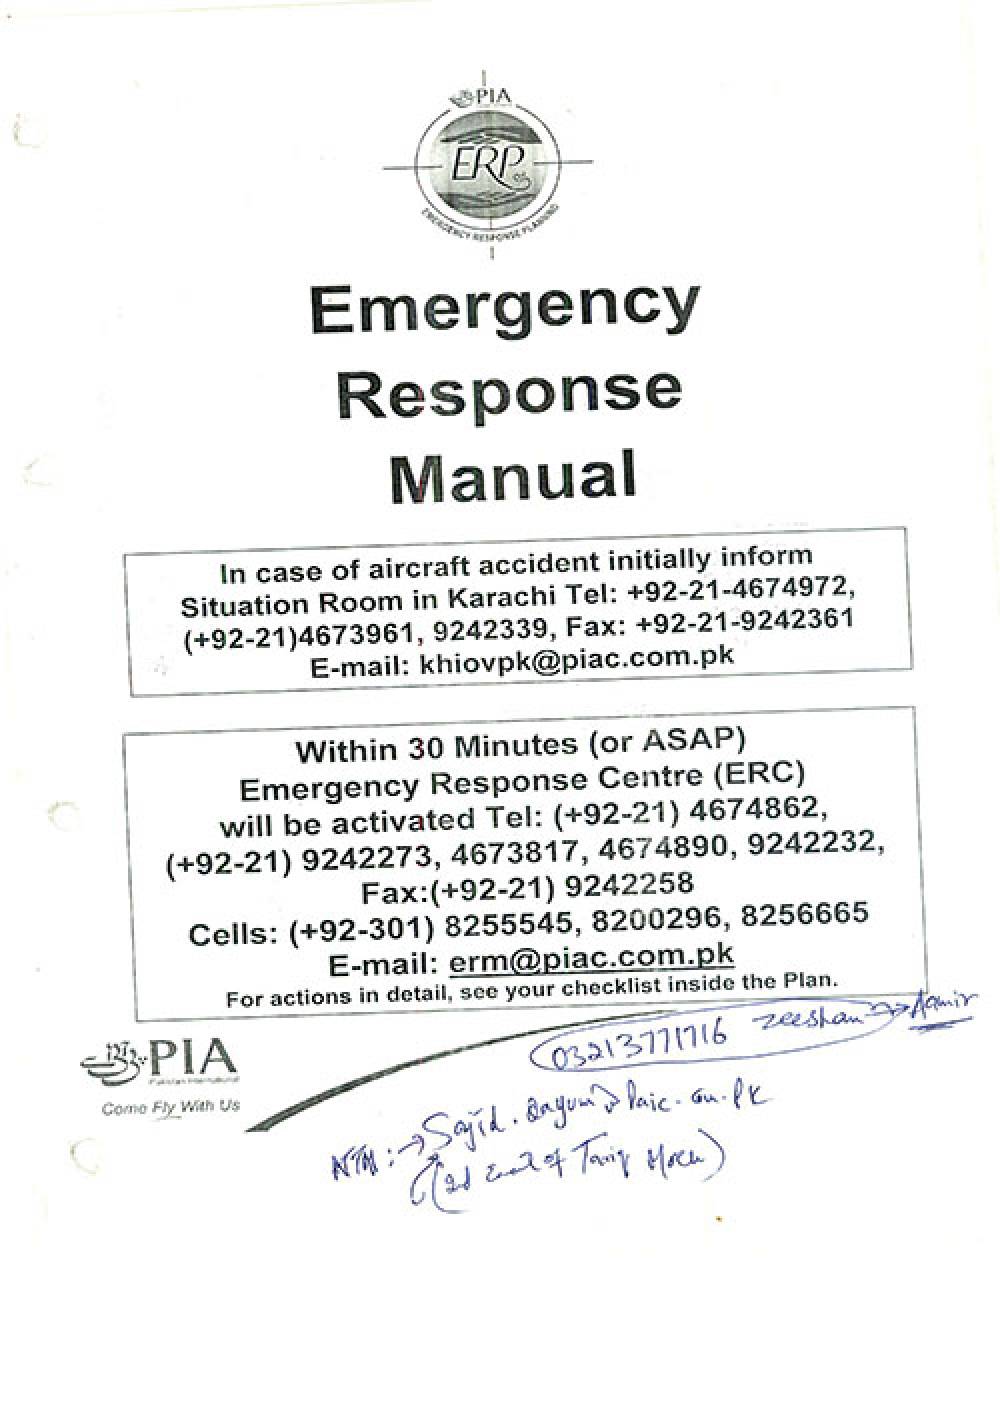 Emergency Response Manual by PIA